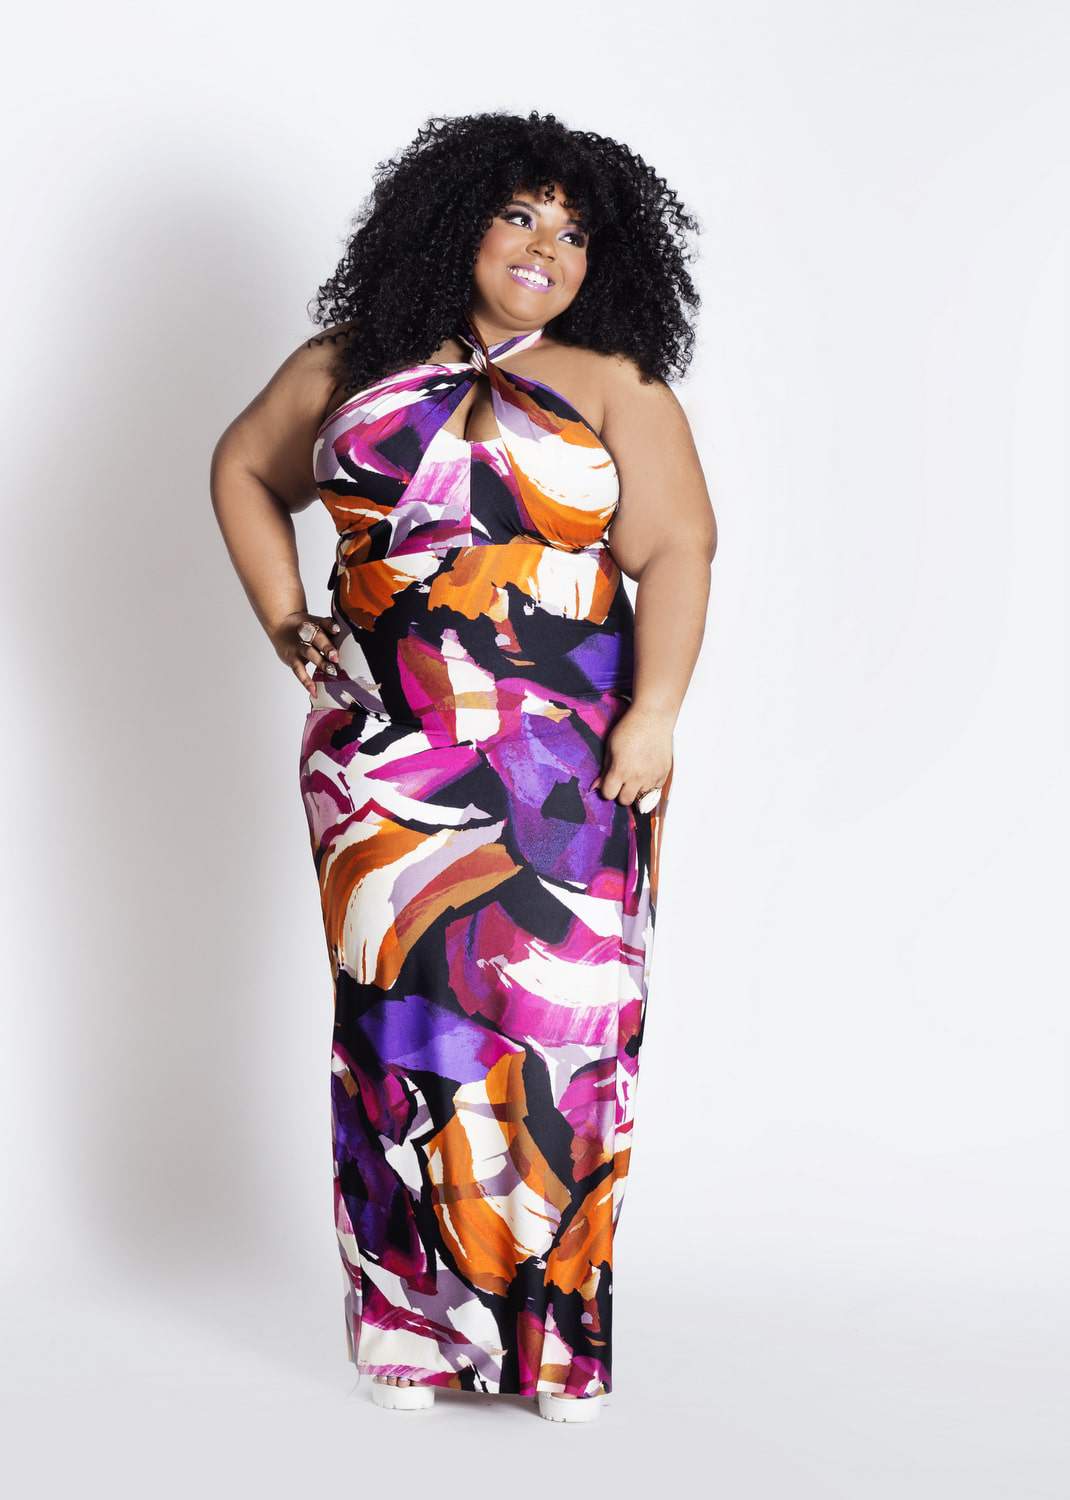 Living Single Plus Size Collection by designer Courtney Noelle